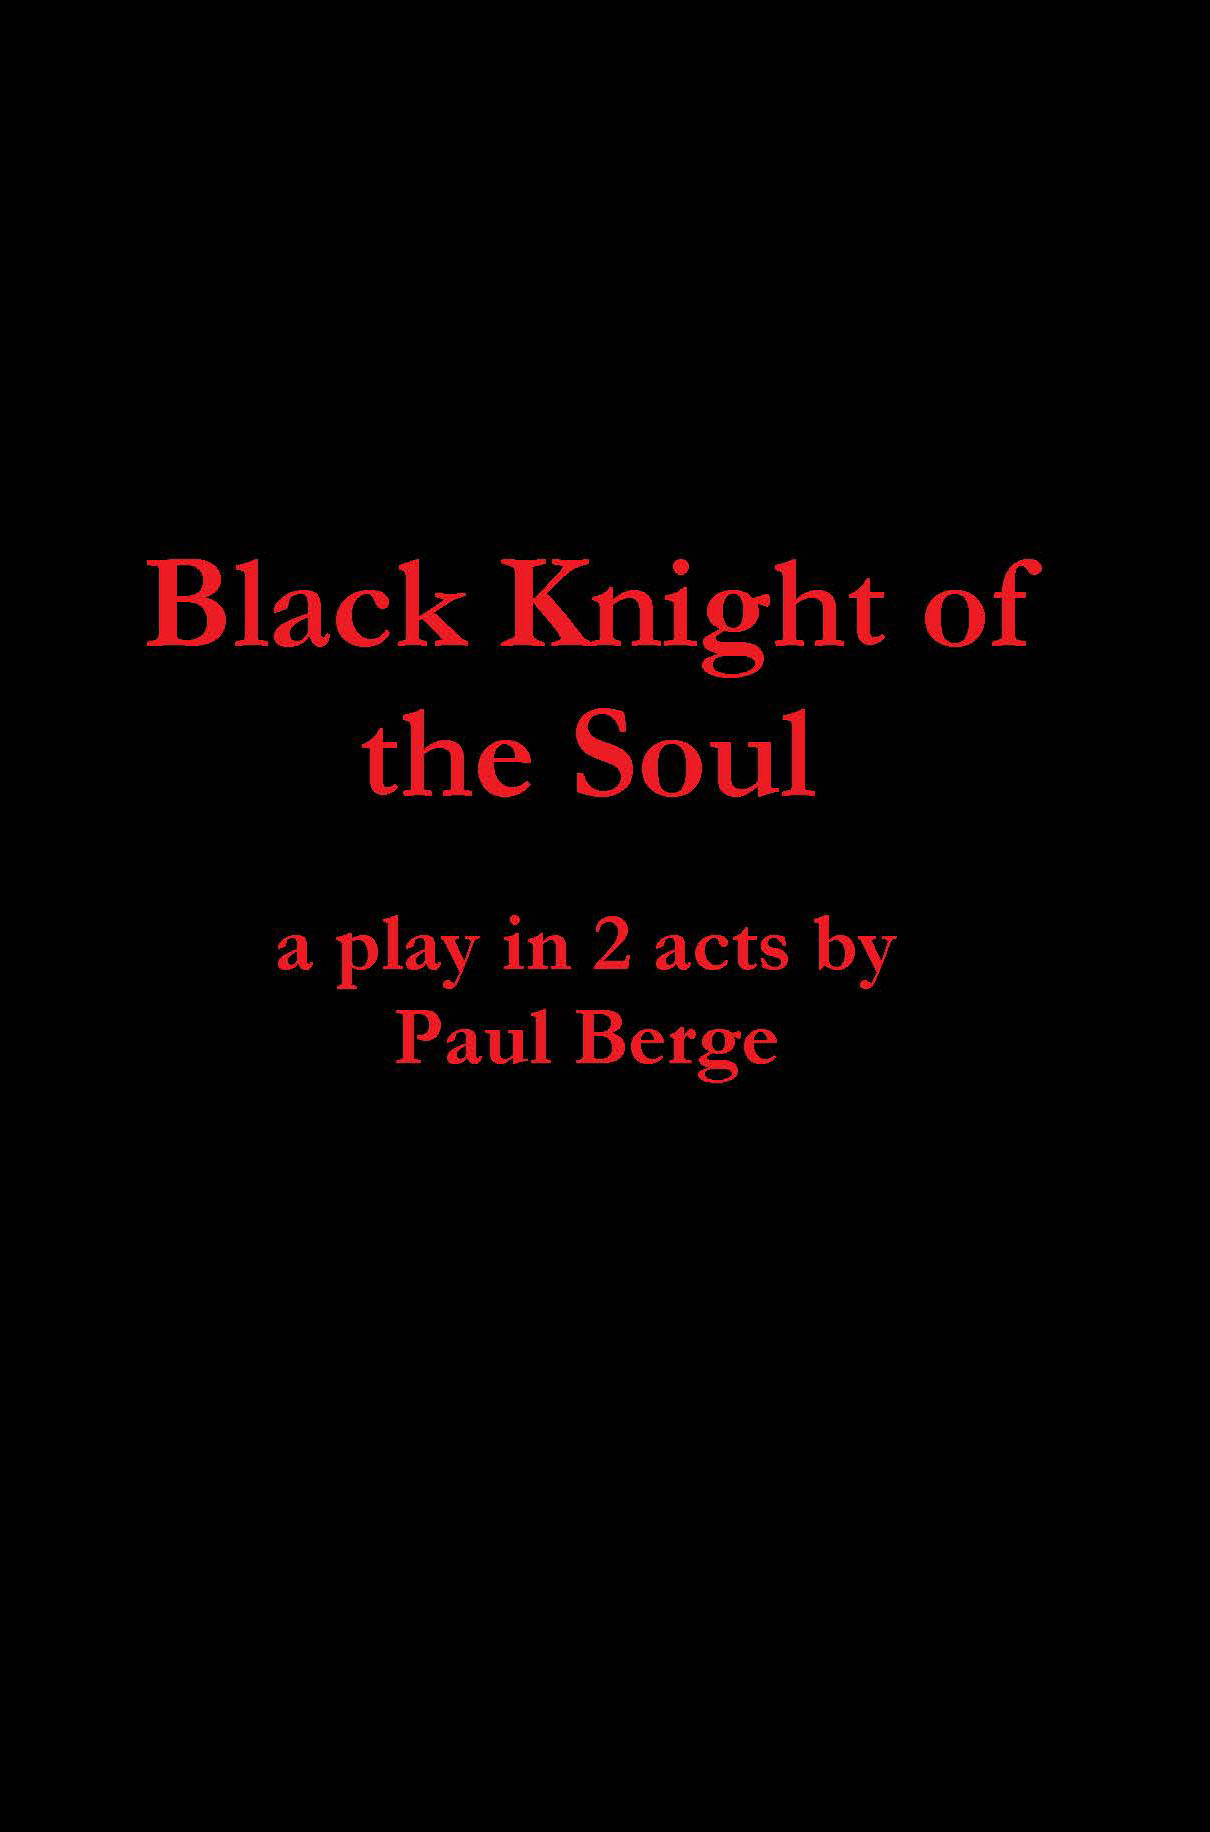 Black Knight of the Soul